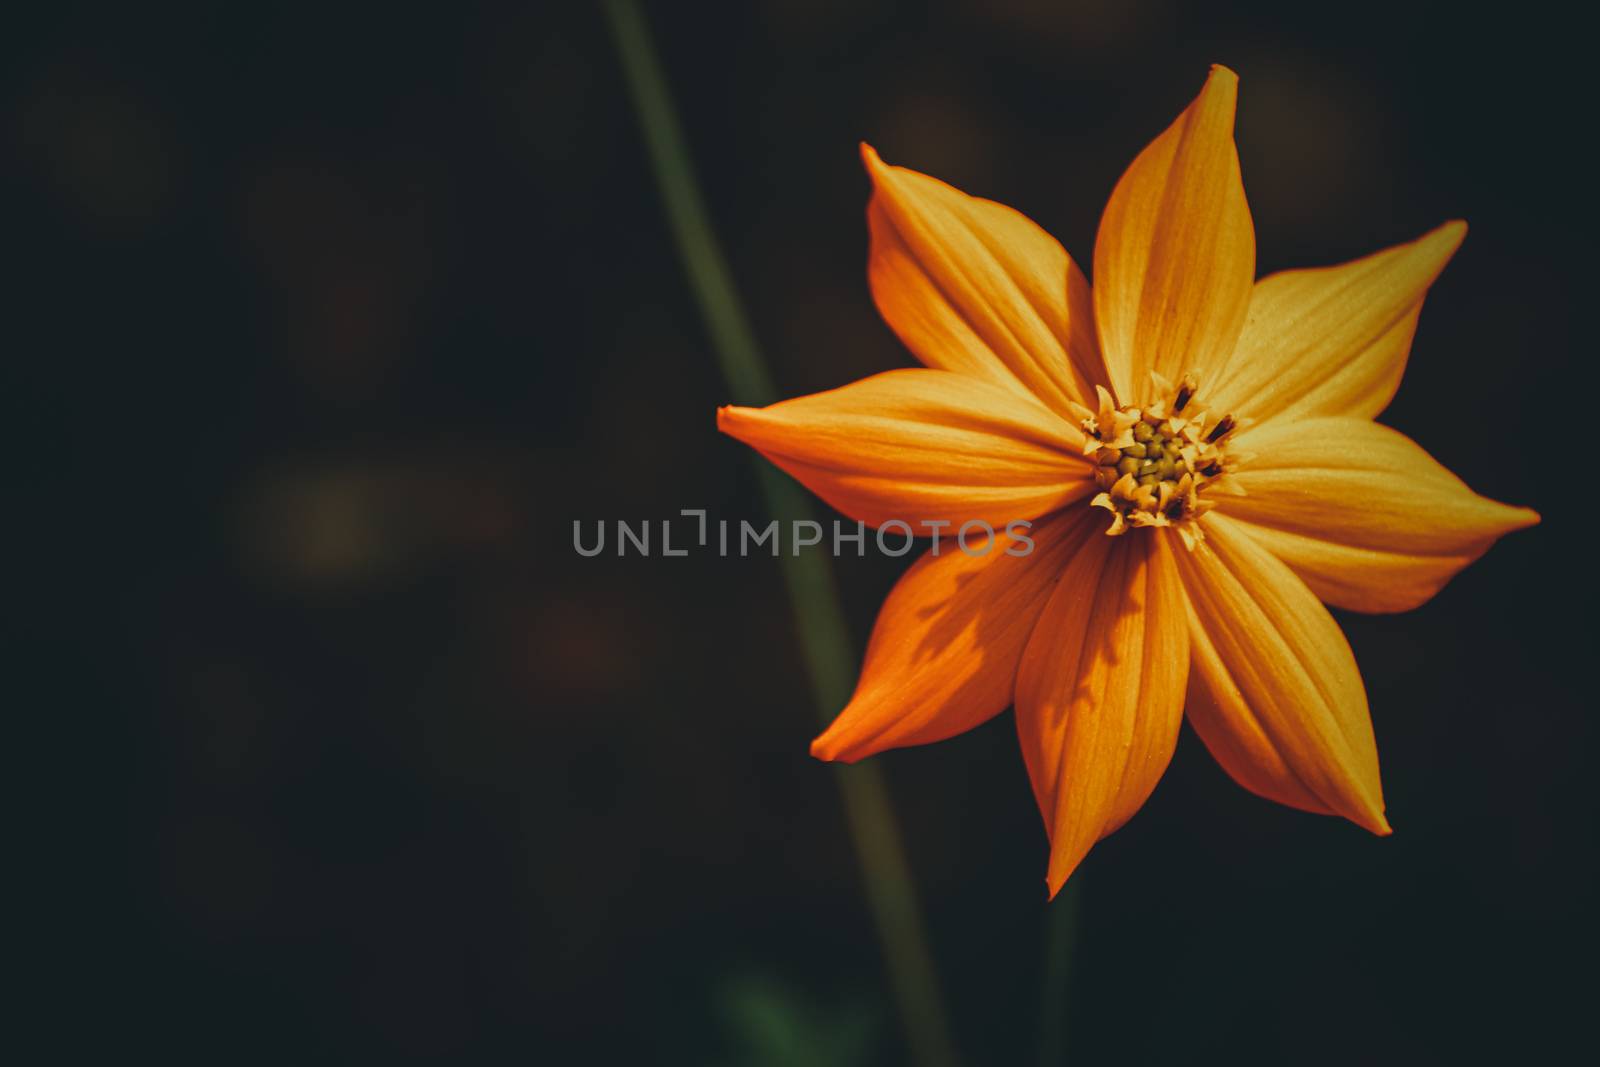 Marigold flower against a dark background showing the concept of Floral Spring theme